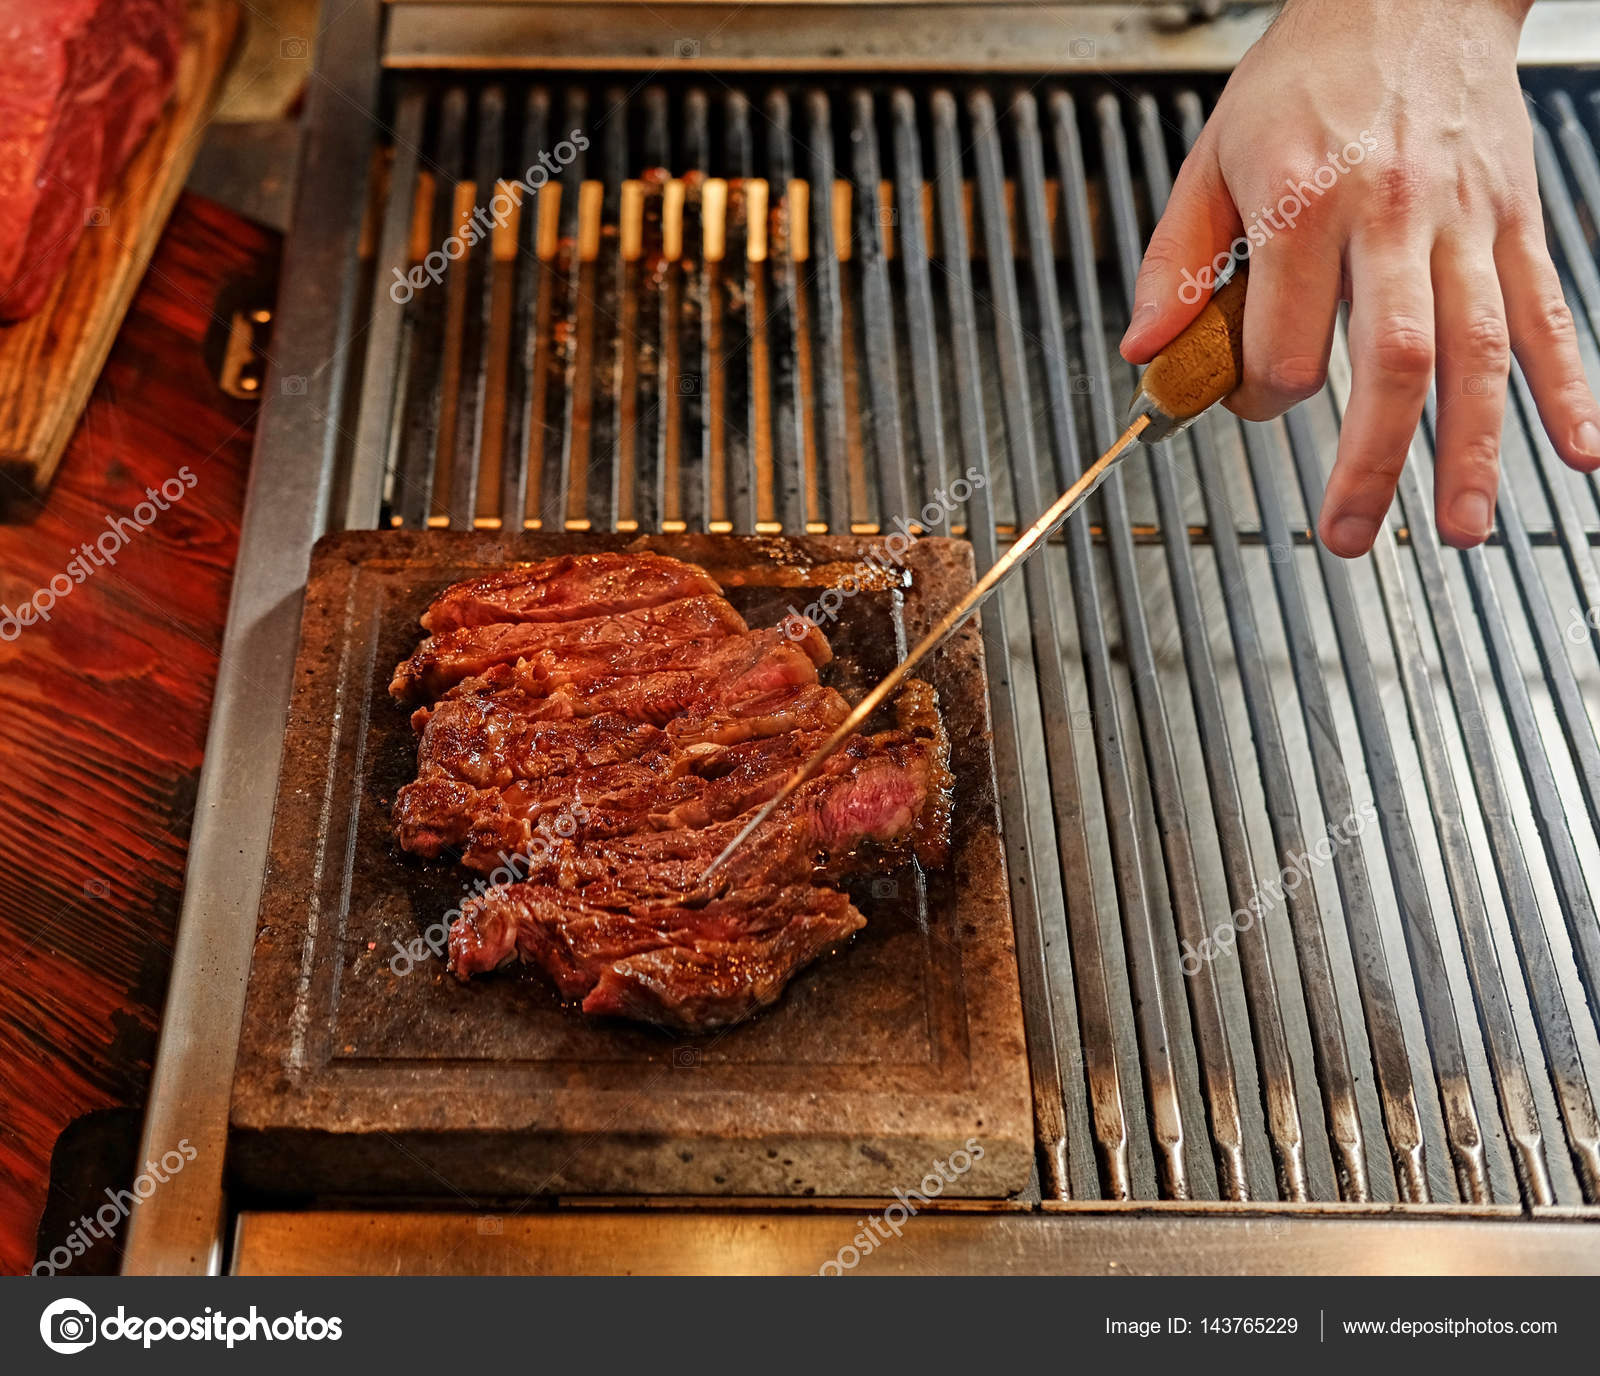 A man cooking beef steak on a grill — Stock Photo © fxquadro #143765229